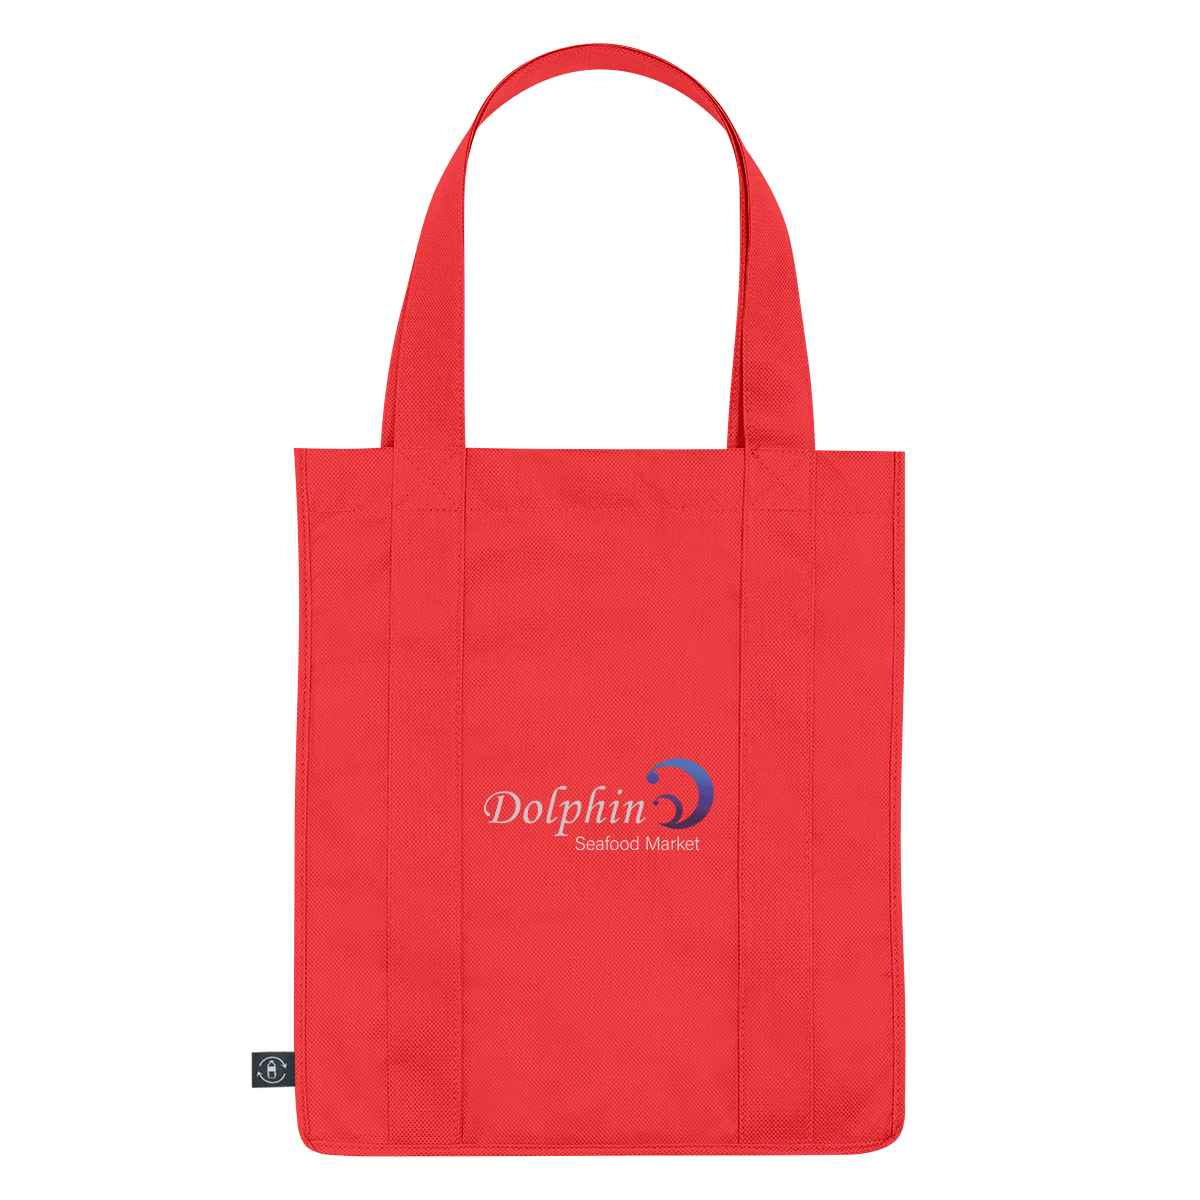 Non-Woven Shopper Tote Bag with 100% RPET Material - Show Your Logo